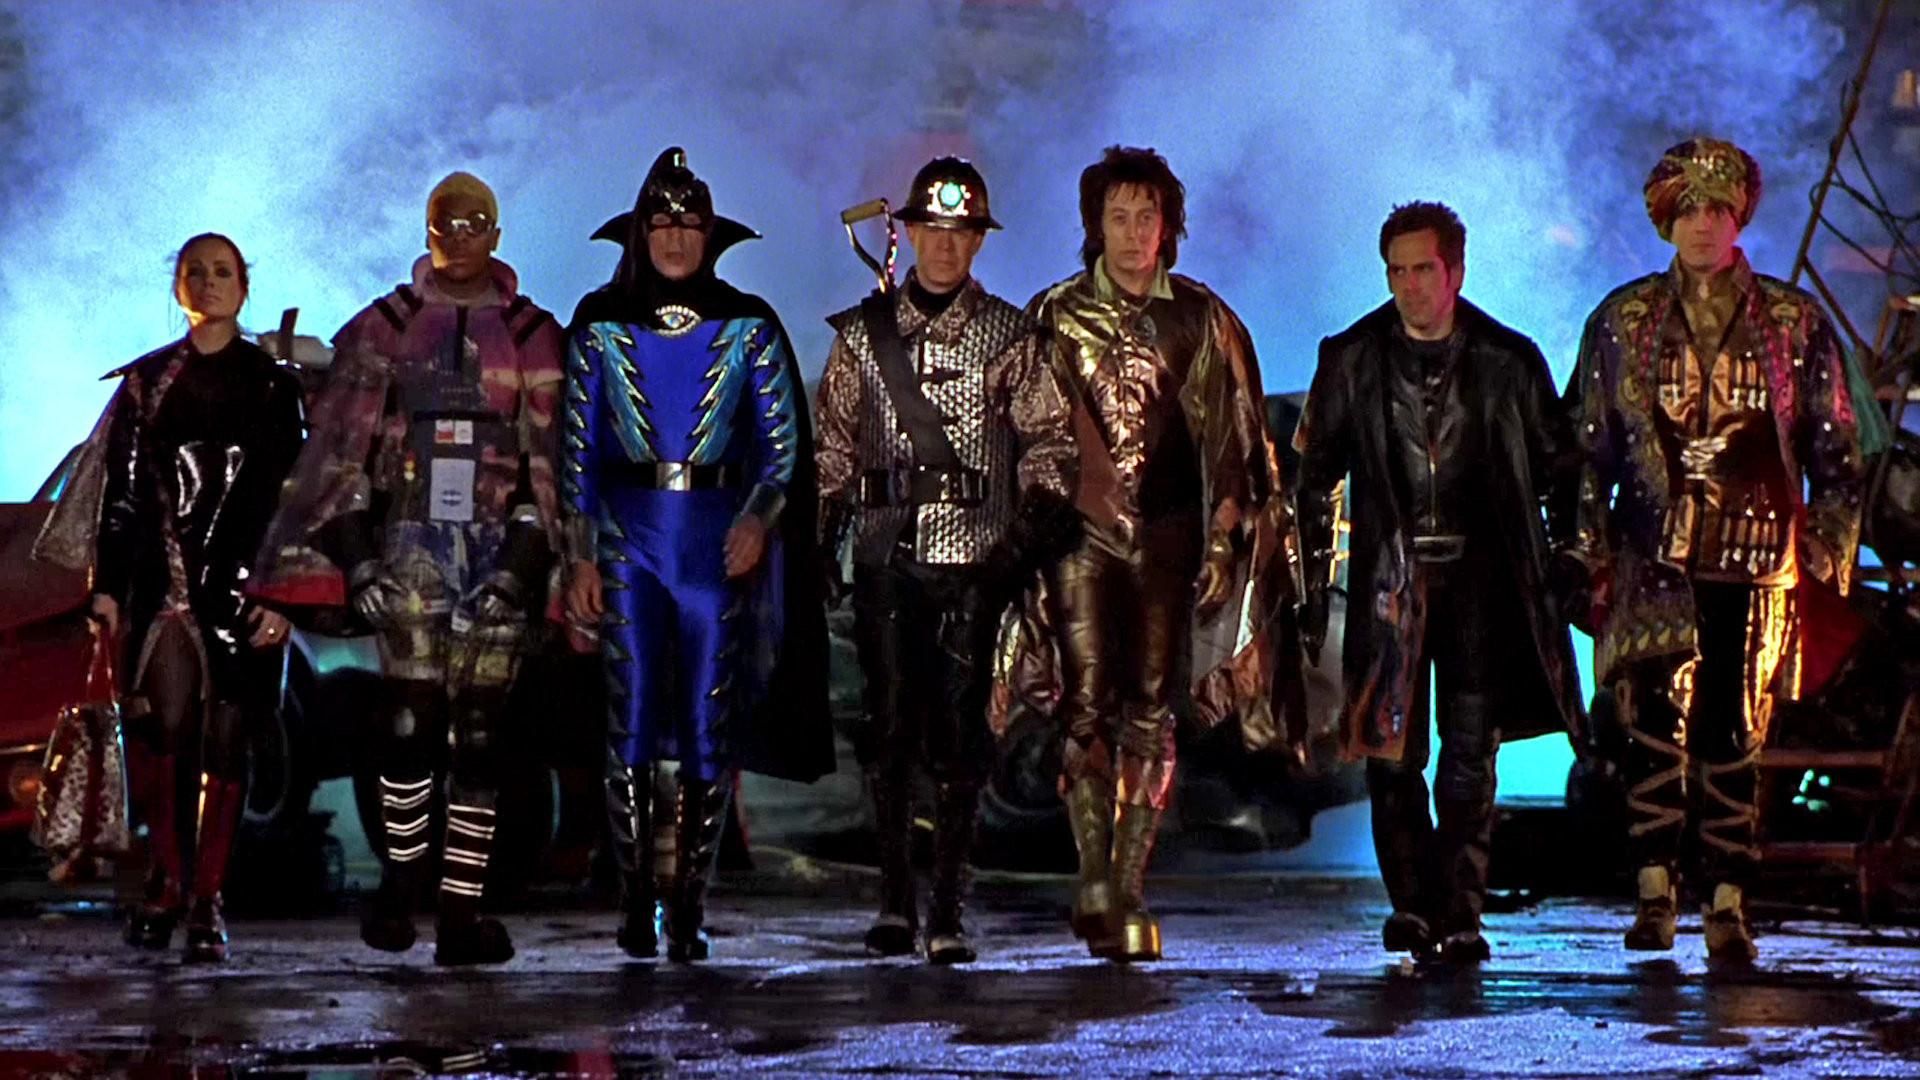 The superheroes in Mystery Men